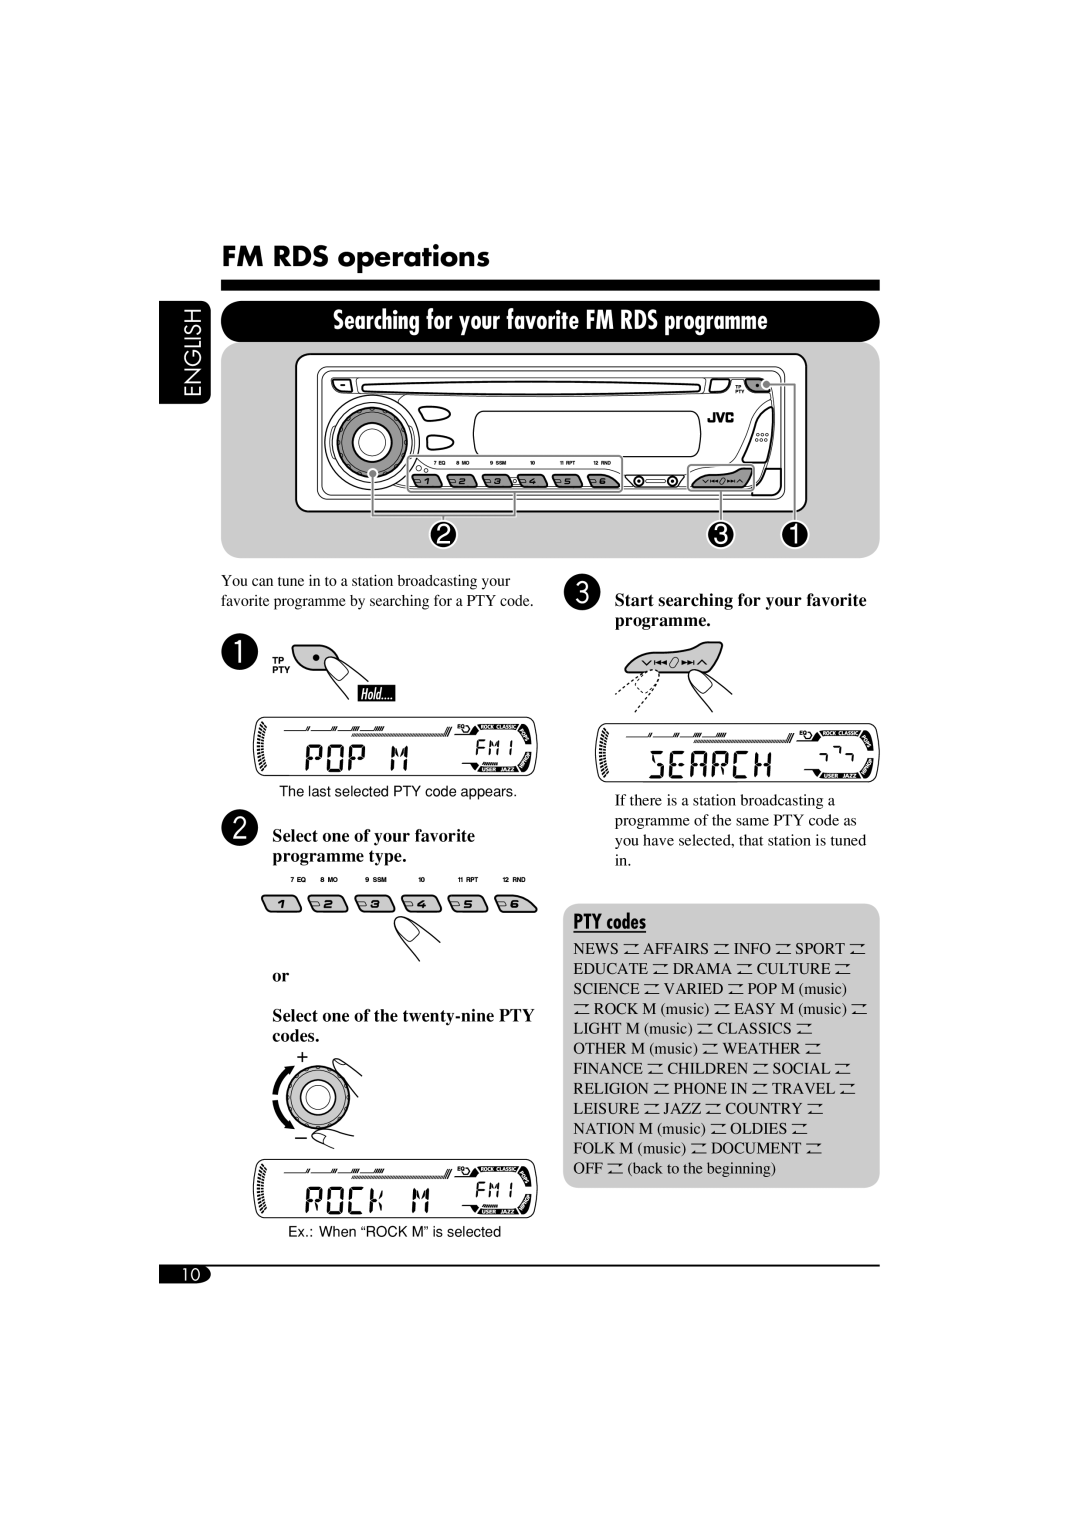 JVC KD-G411 manual FM RDS operations, Searching for your favorite FM RDS programme, English, PTY codes 